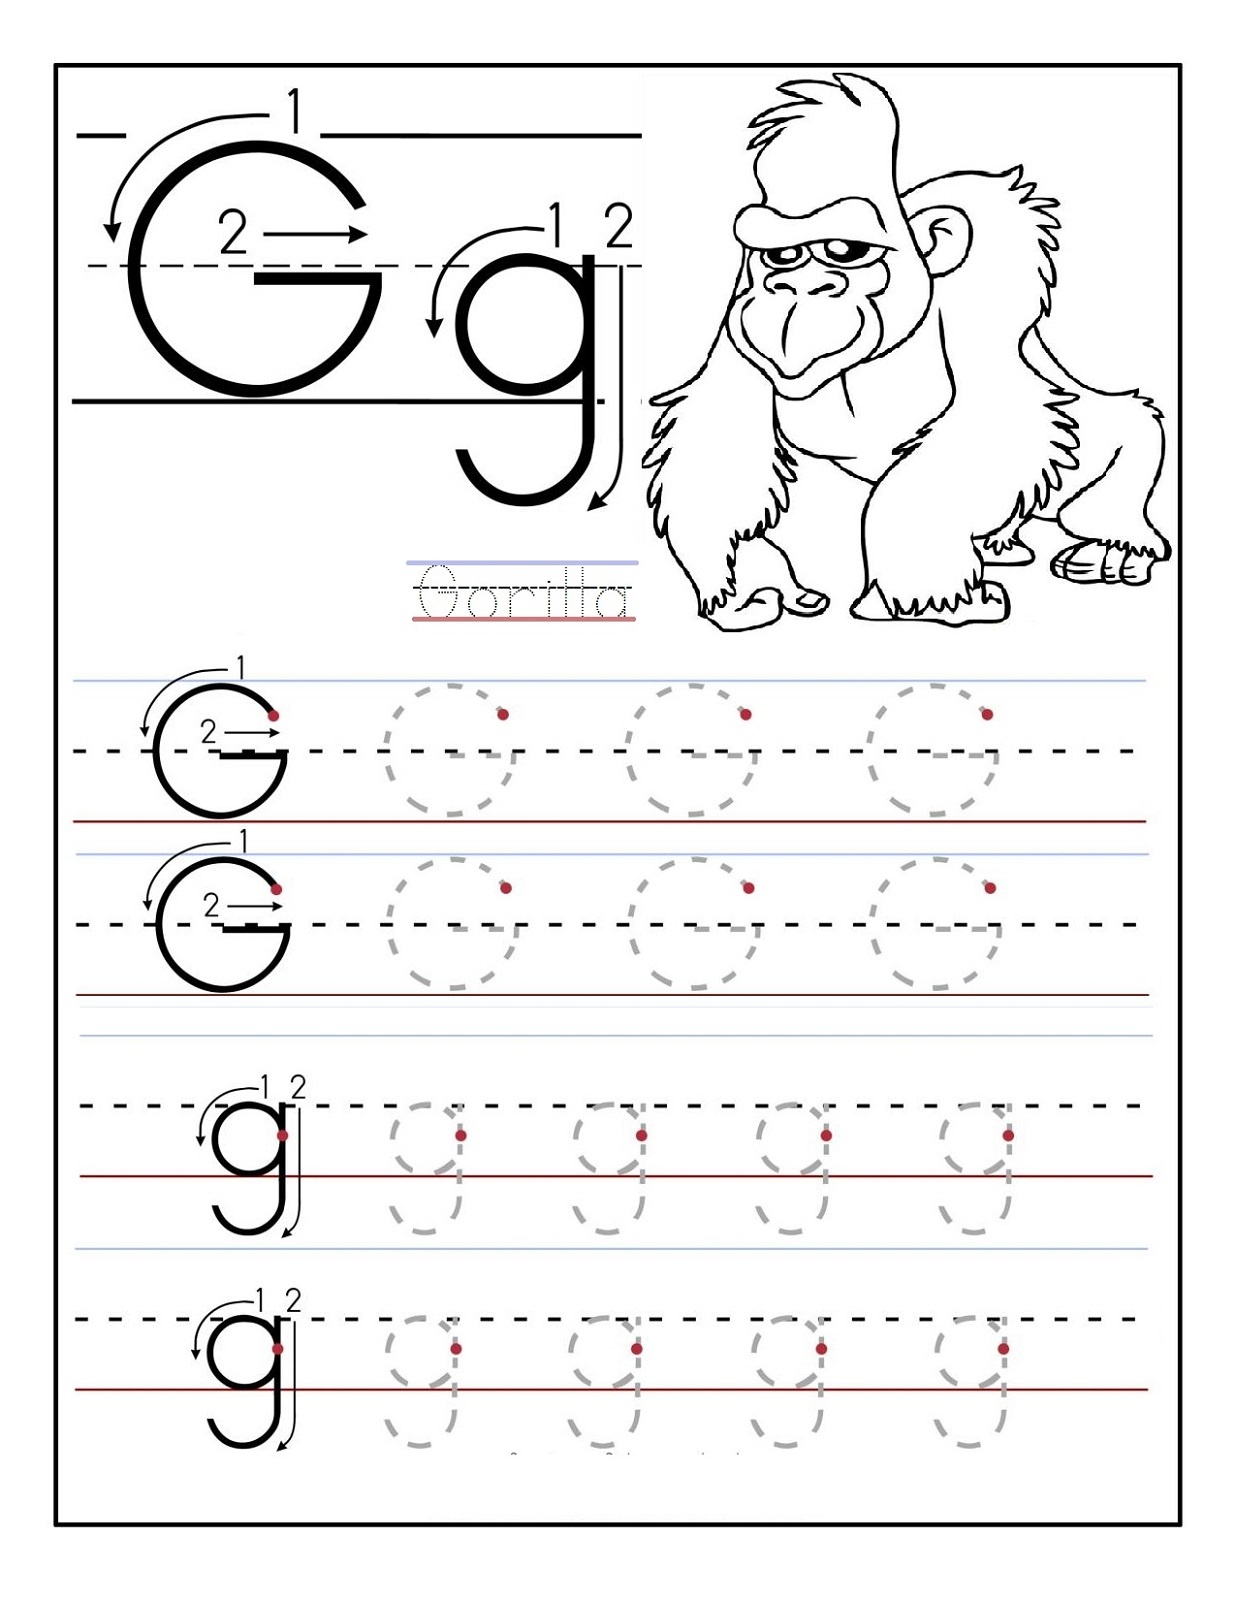 Free Printable Activities For Kids | Educative Printable - Free Printable Activities